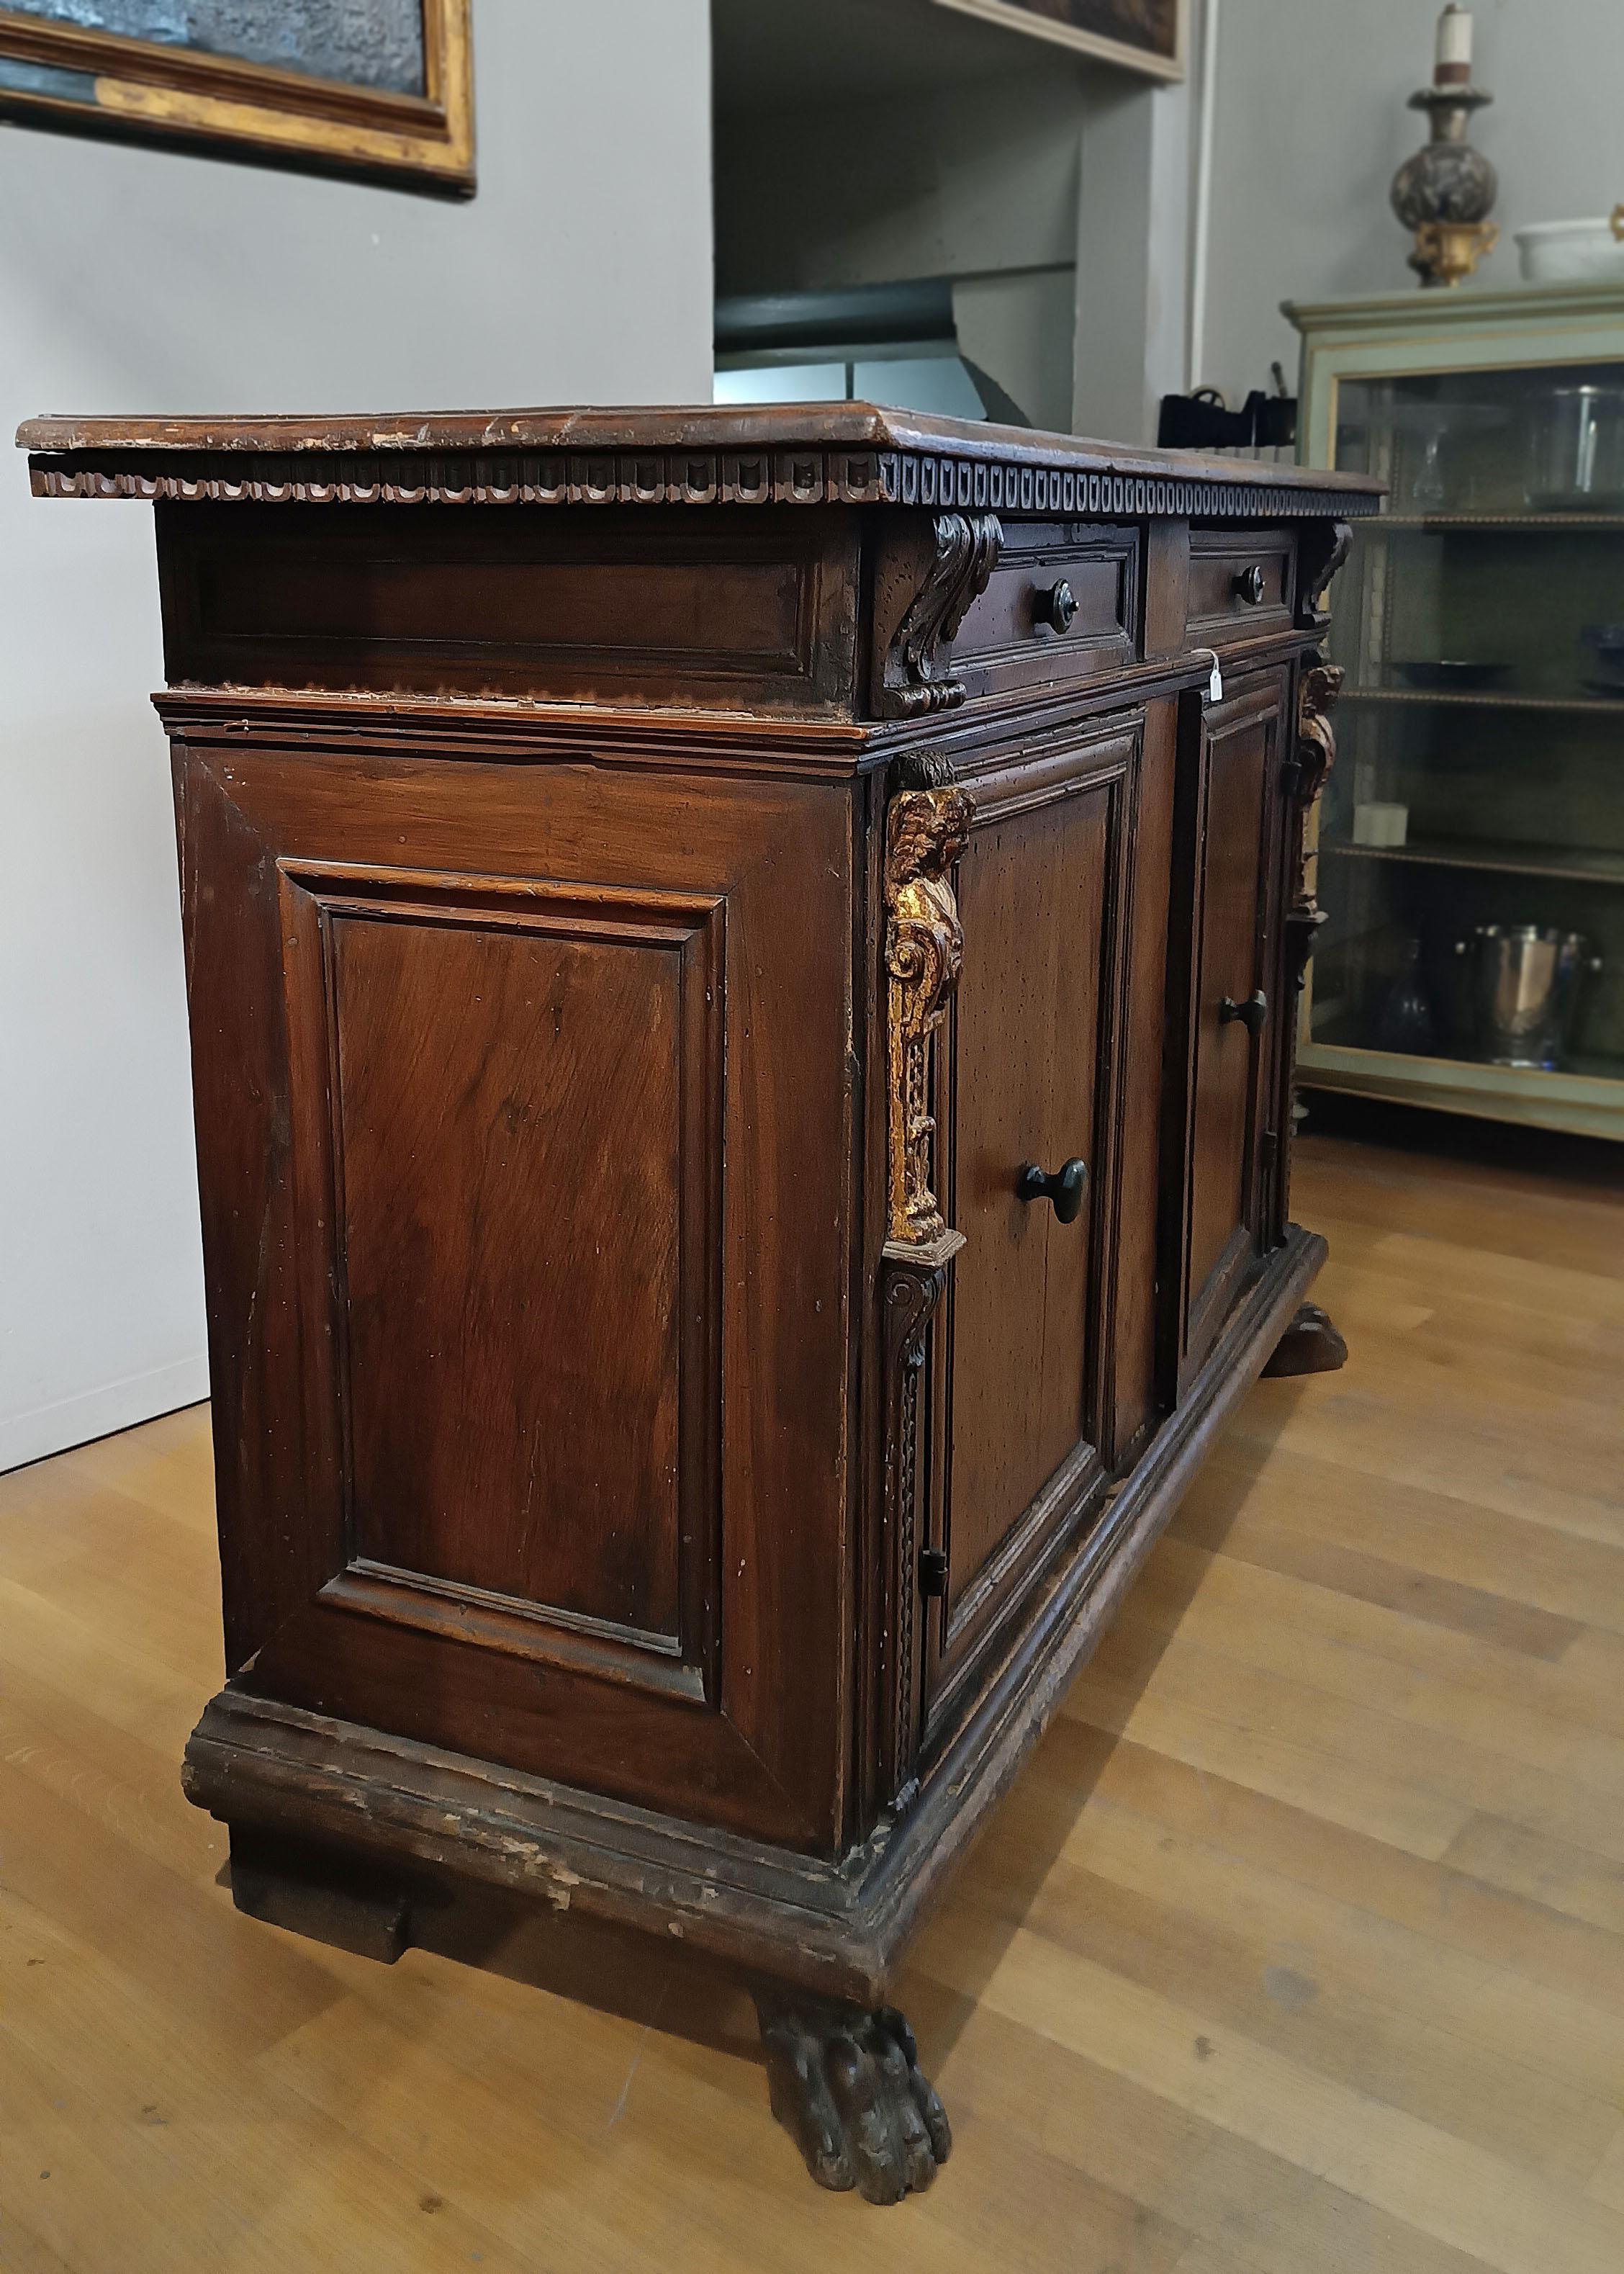 Renaissance END OF 16th-EARLY 17th CENTURY SIDEBOARD WITH CARYATIDS  For Sale